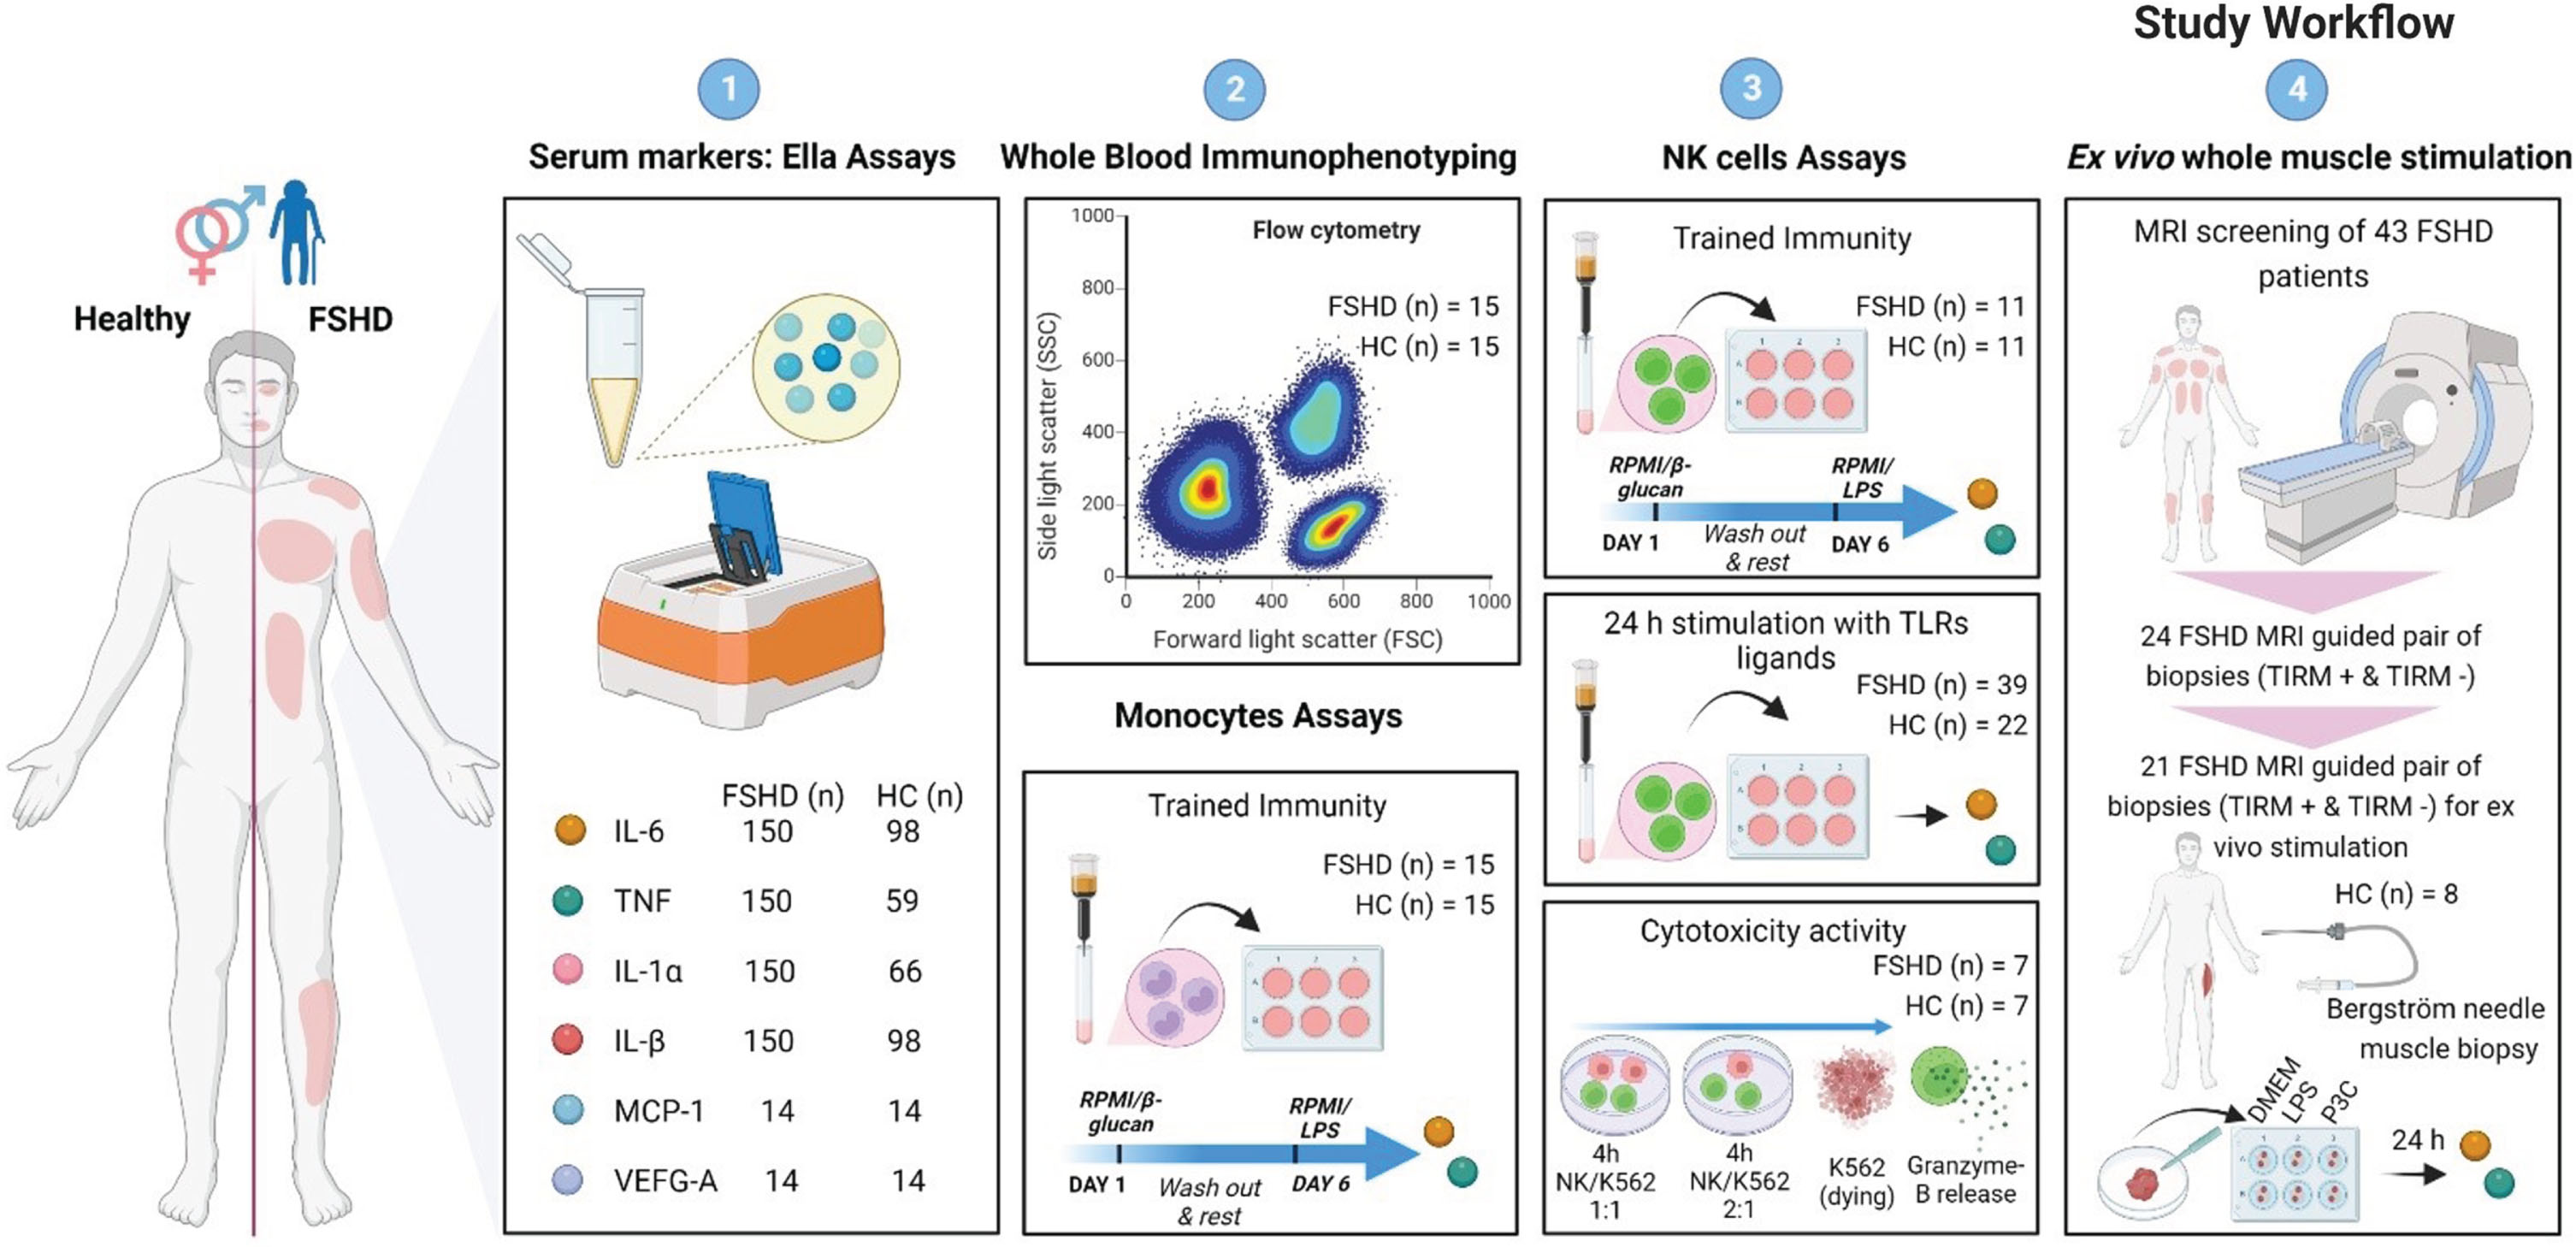 Study Workflow. (1) As a first step a selected group of markers (IL-6, TNF, IL-1α, IL-1β, MCP-1, and VEGF-A) were measured in serum samples of FSHD patients and sex- and age matched healthy control using the highly sensitive multi-analyte Ella Simple Plex Cartridge Kit. (2) Next, whole blood immunophenotyping and trained immunity of monocytes was studied in FSHD patients and matched healthy controls. (3) Third, trained immunity and ex vivo stimulation with TLRs ligands was studied in NK cells of FSHD patients and matched healthy controls. (4) Lastly, we characterized inflammation not only at a systemic but also at a local level using the highly targeted MRI-guided muscle biopsies. 21 pair of FHSD MRI guided muscle biopsies (TIRM+ and TIRM–) and 8 healthy control muscle biopsies were ex vivo stimulated for 24 hours.